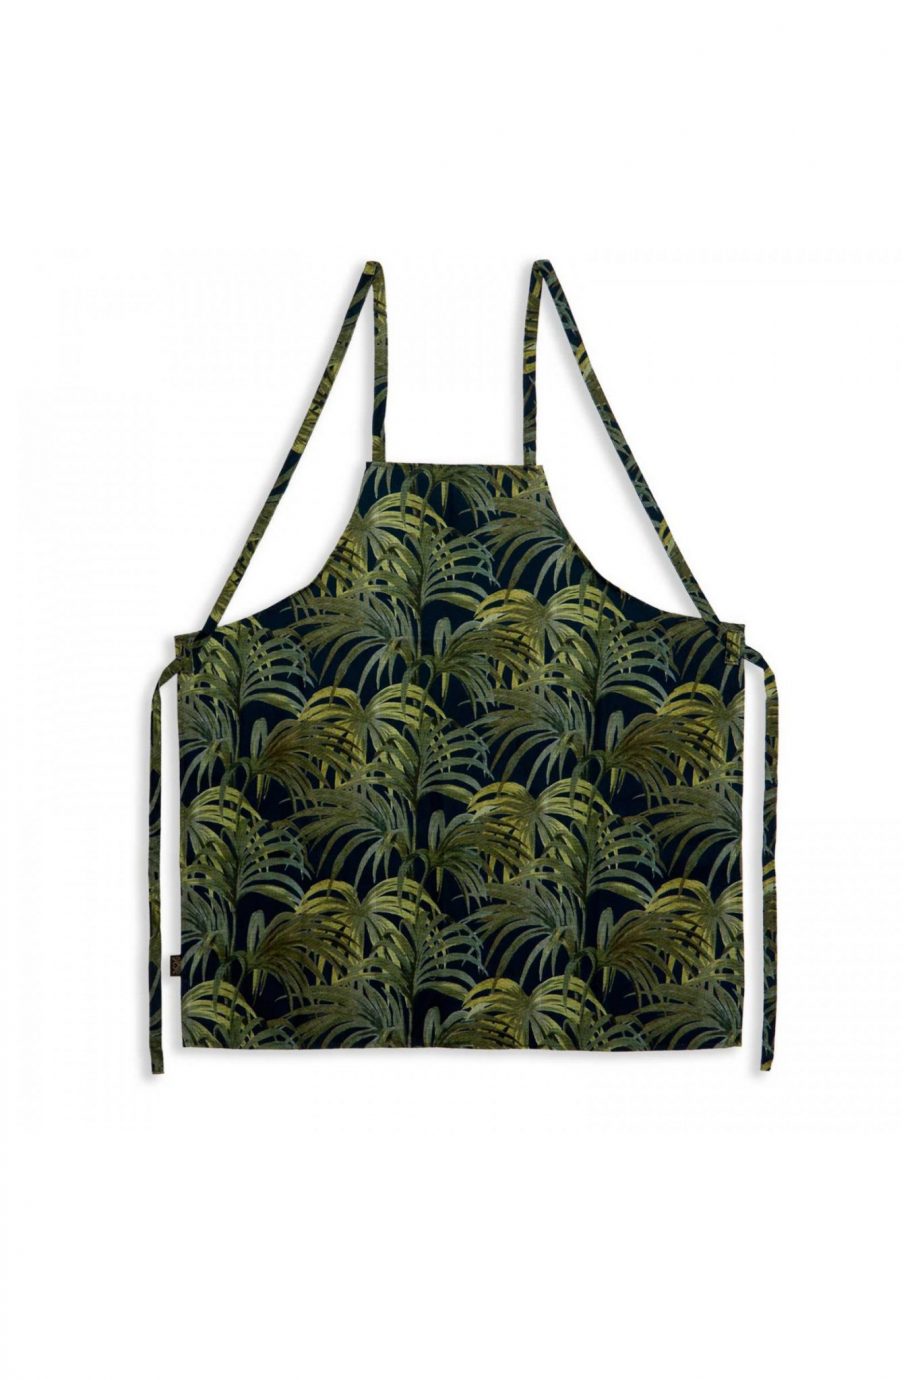 palmeral midnight green cotton apron 920x1380 - Forkle - Palmeral